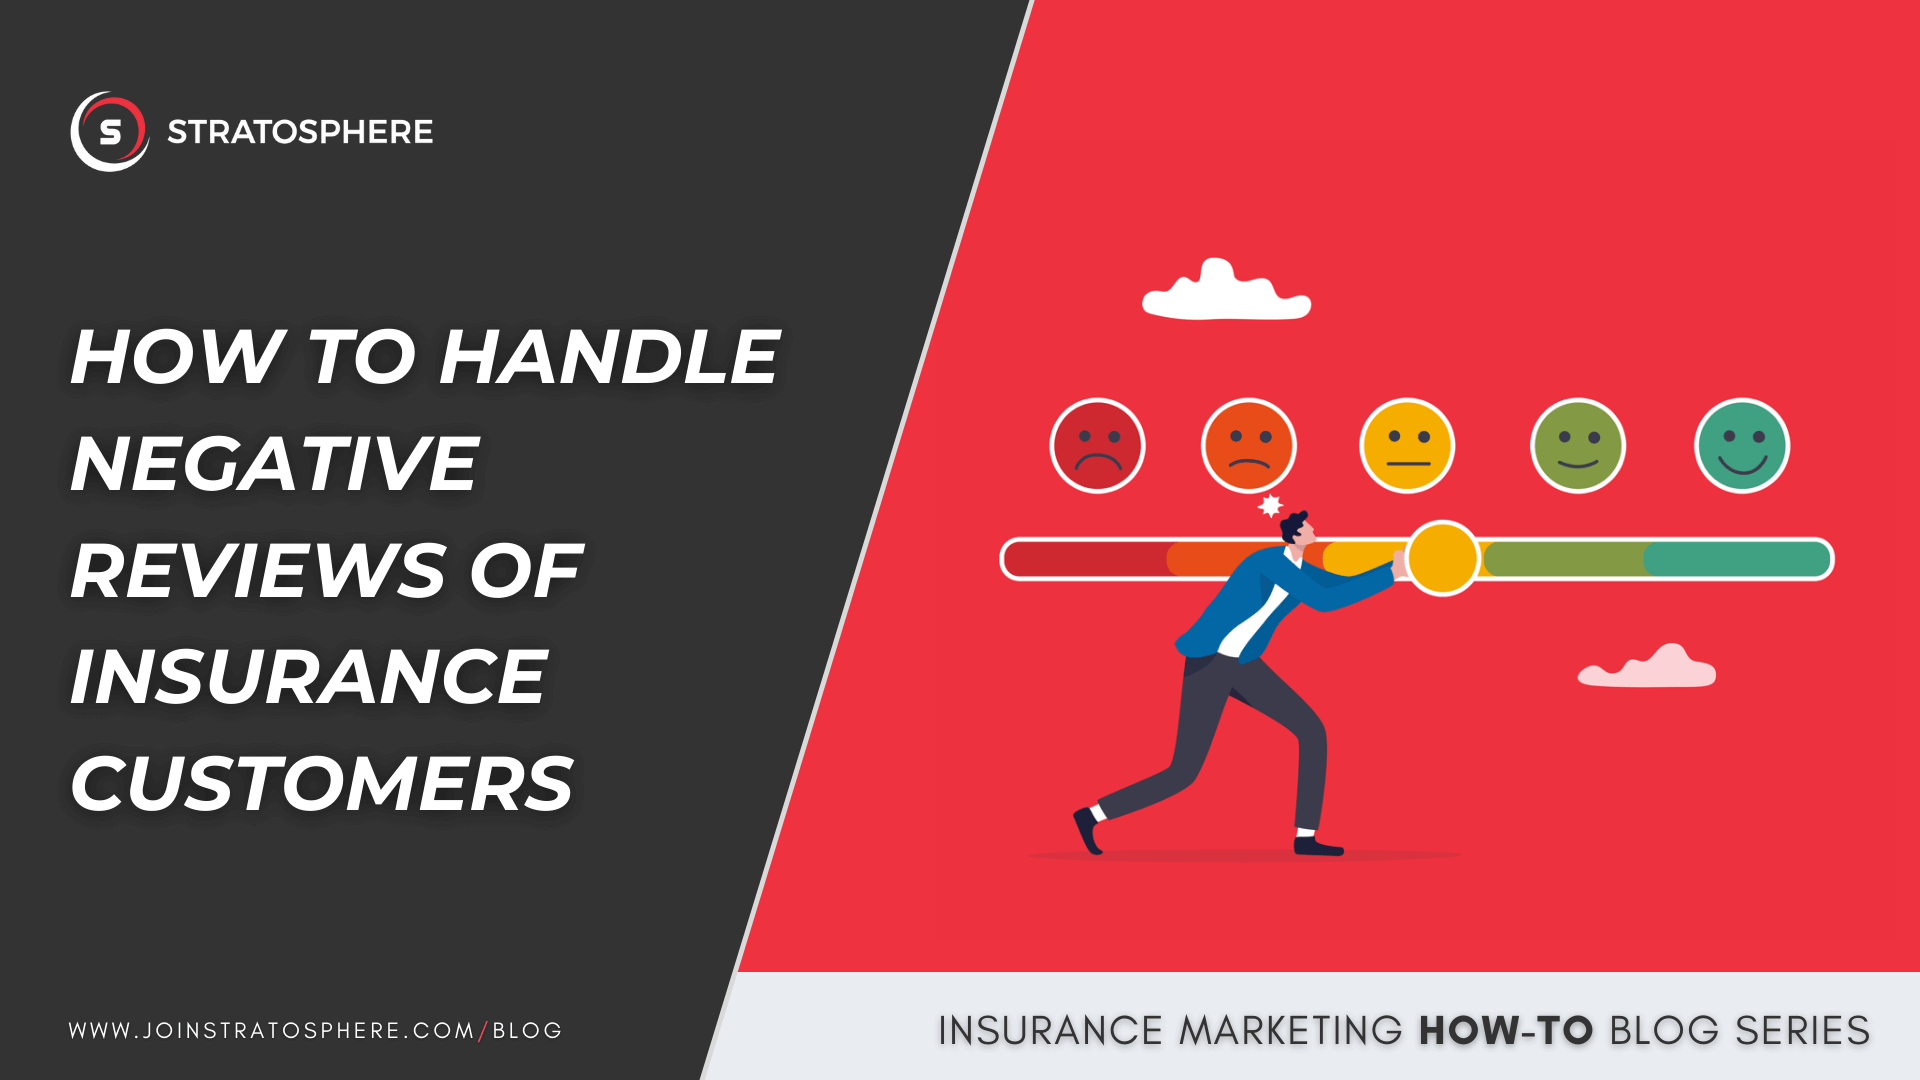 How to Handle Negative Reviews of Insurance Customers